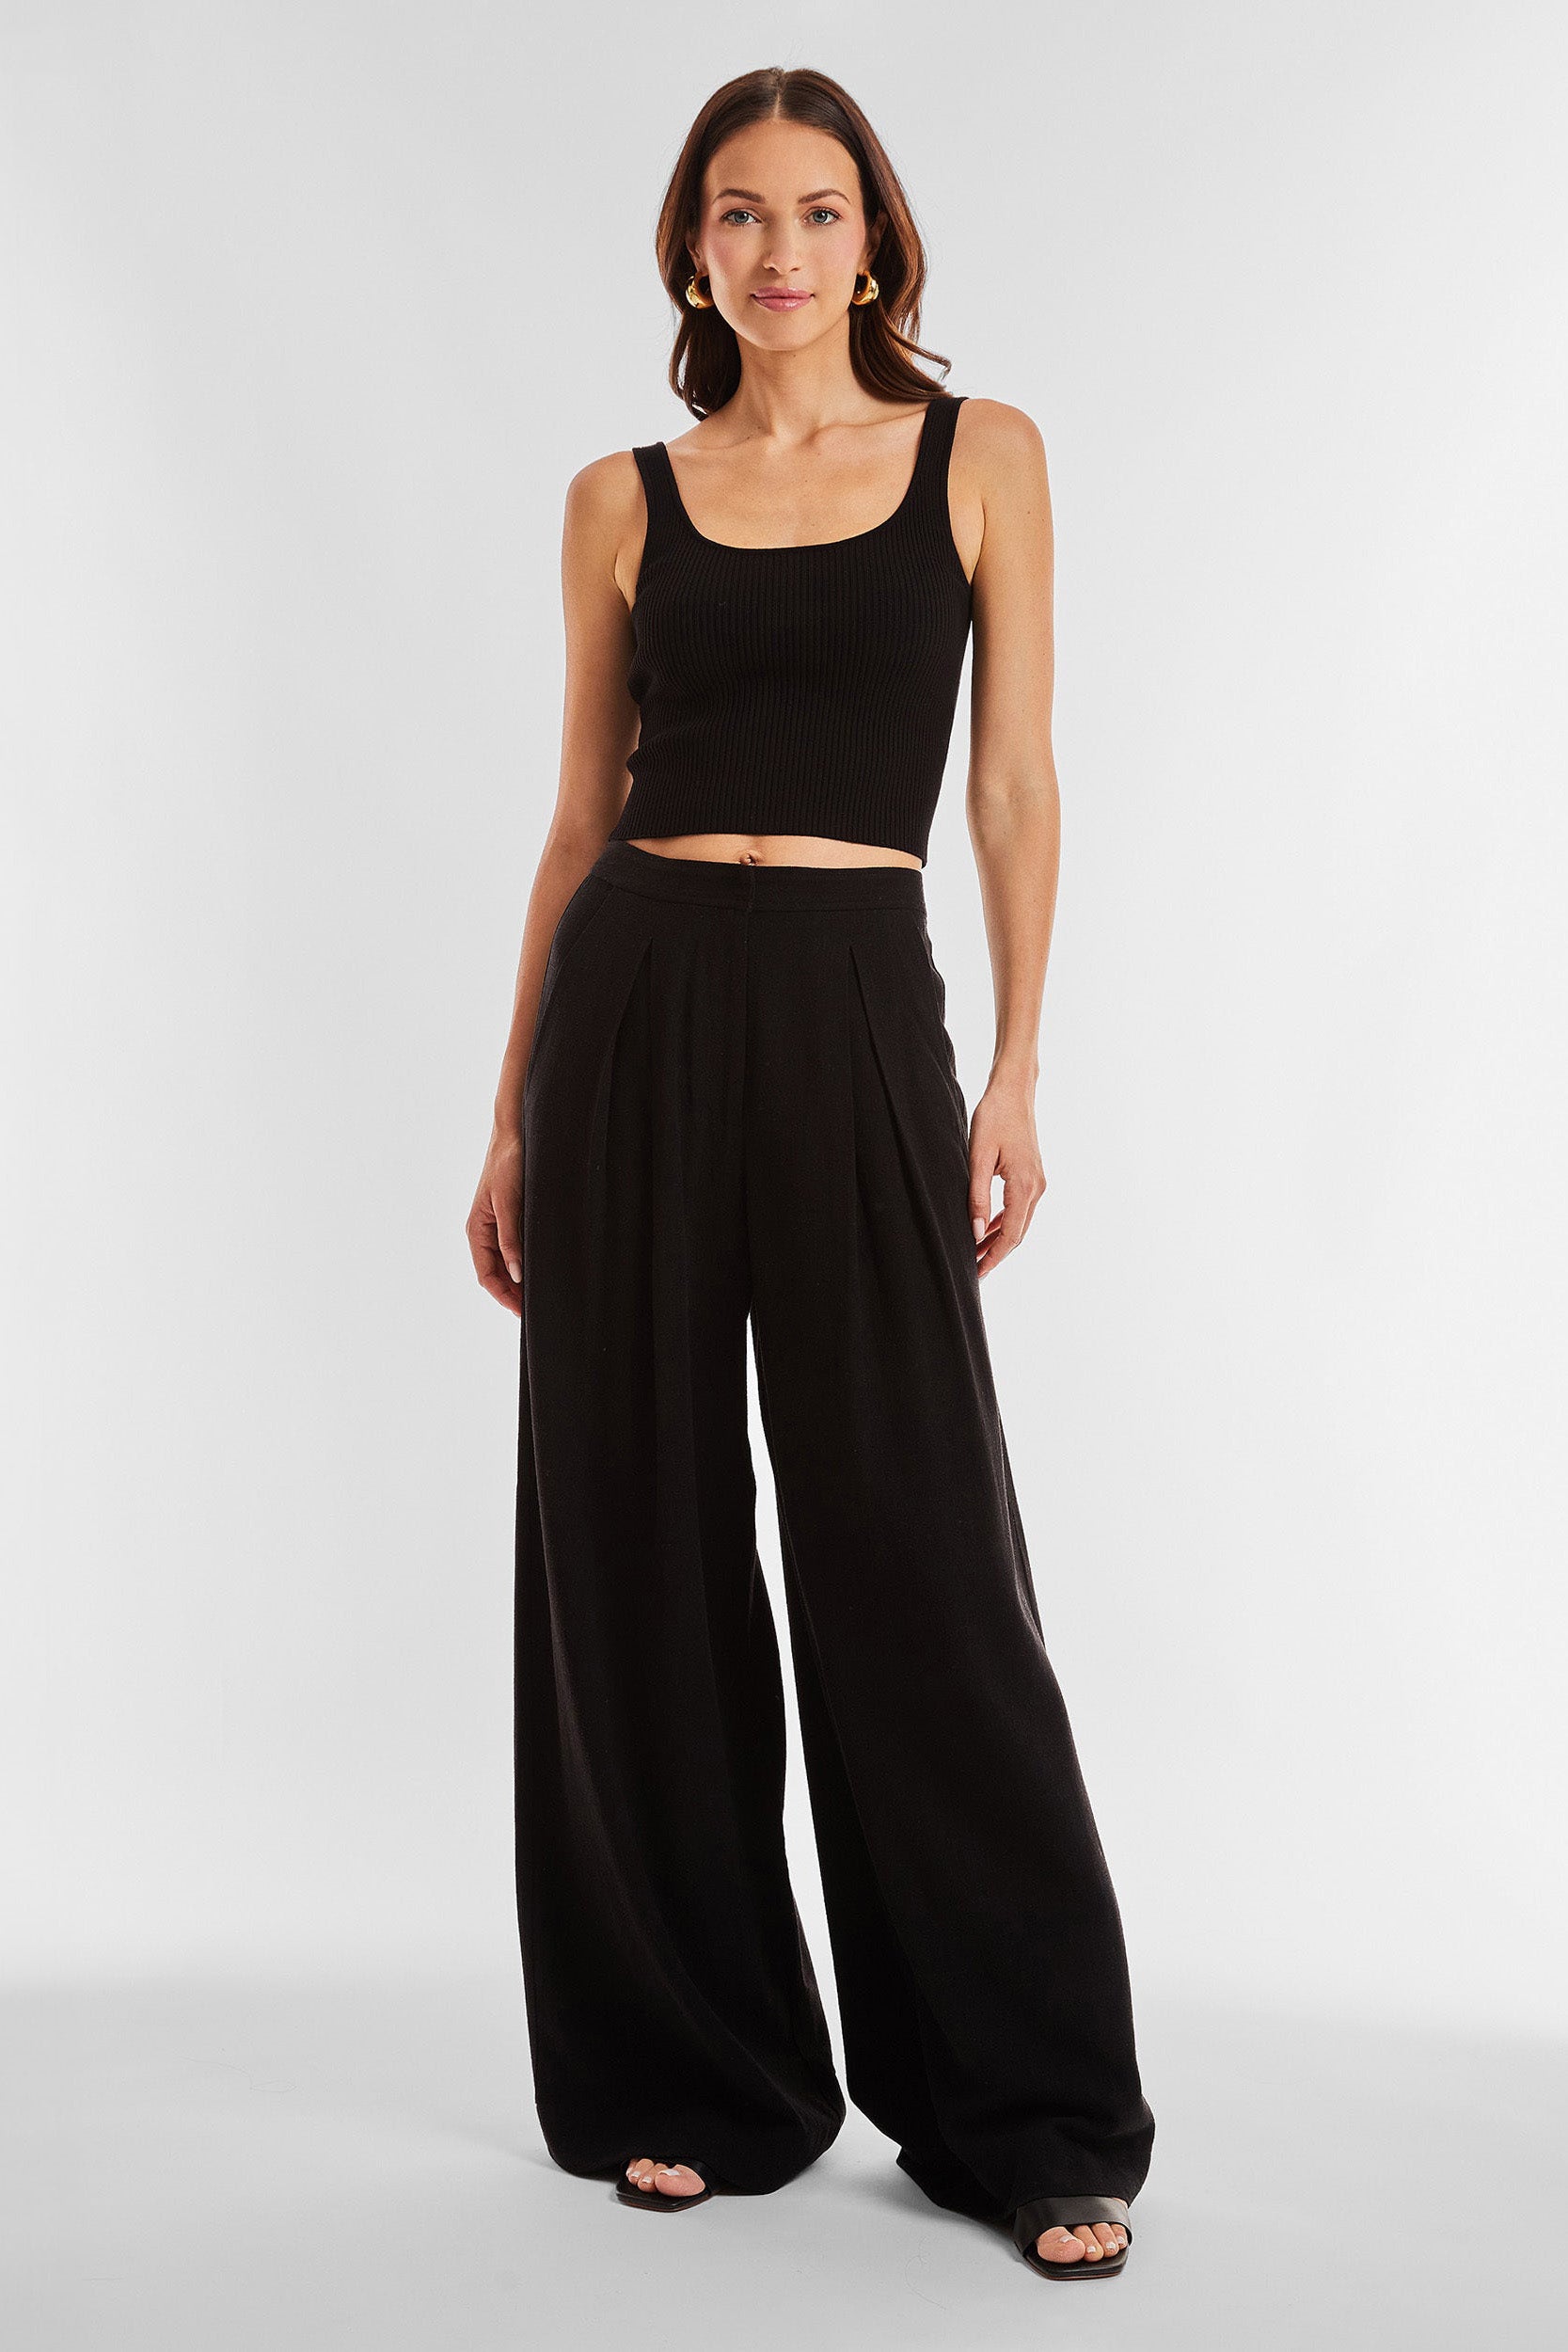 A woman with long hair wearing a black sleeveless crop top and the Seychelles Relaxed Linen Pant in black, designed with a high-waisted, wide-leg fit, exudes confidence against a plain, light-colored background. She completes her look with open-toed black shoes.